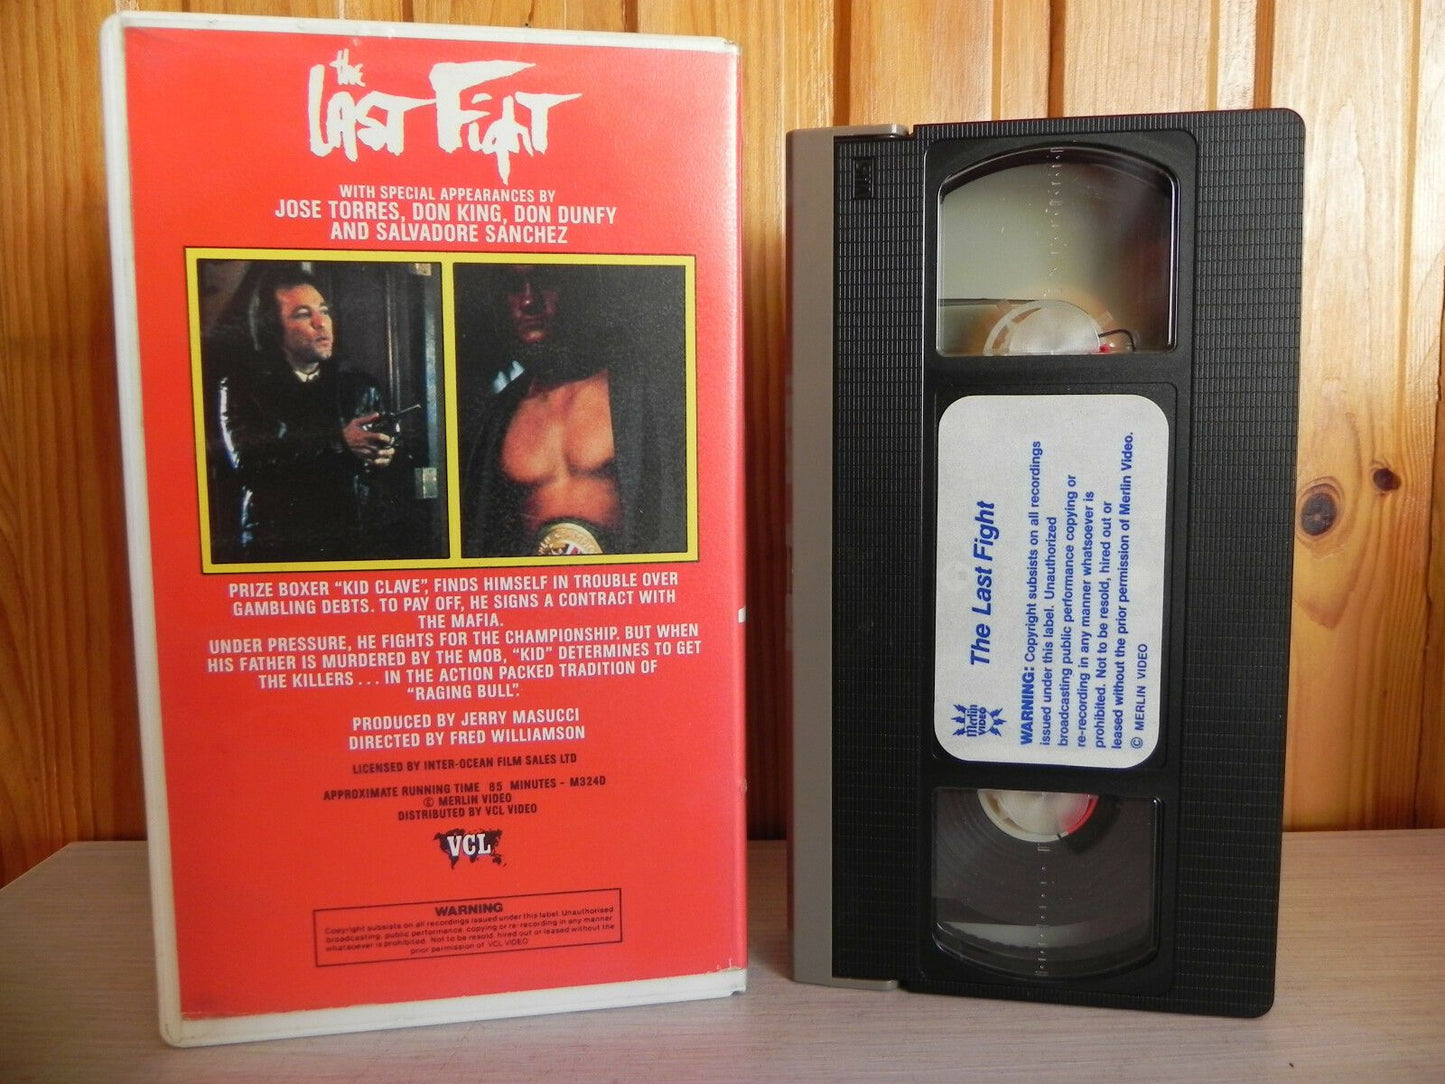 The Last Fight - Boxing Drama - Merlin Video - Pre-Cert - Willie Colon - Pal VHS-